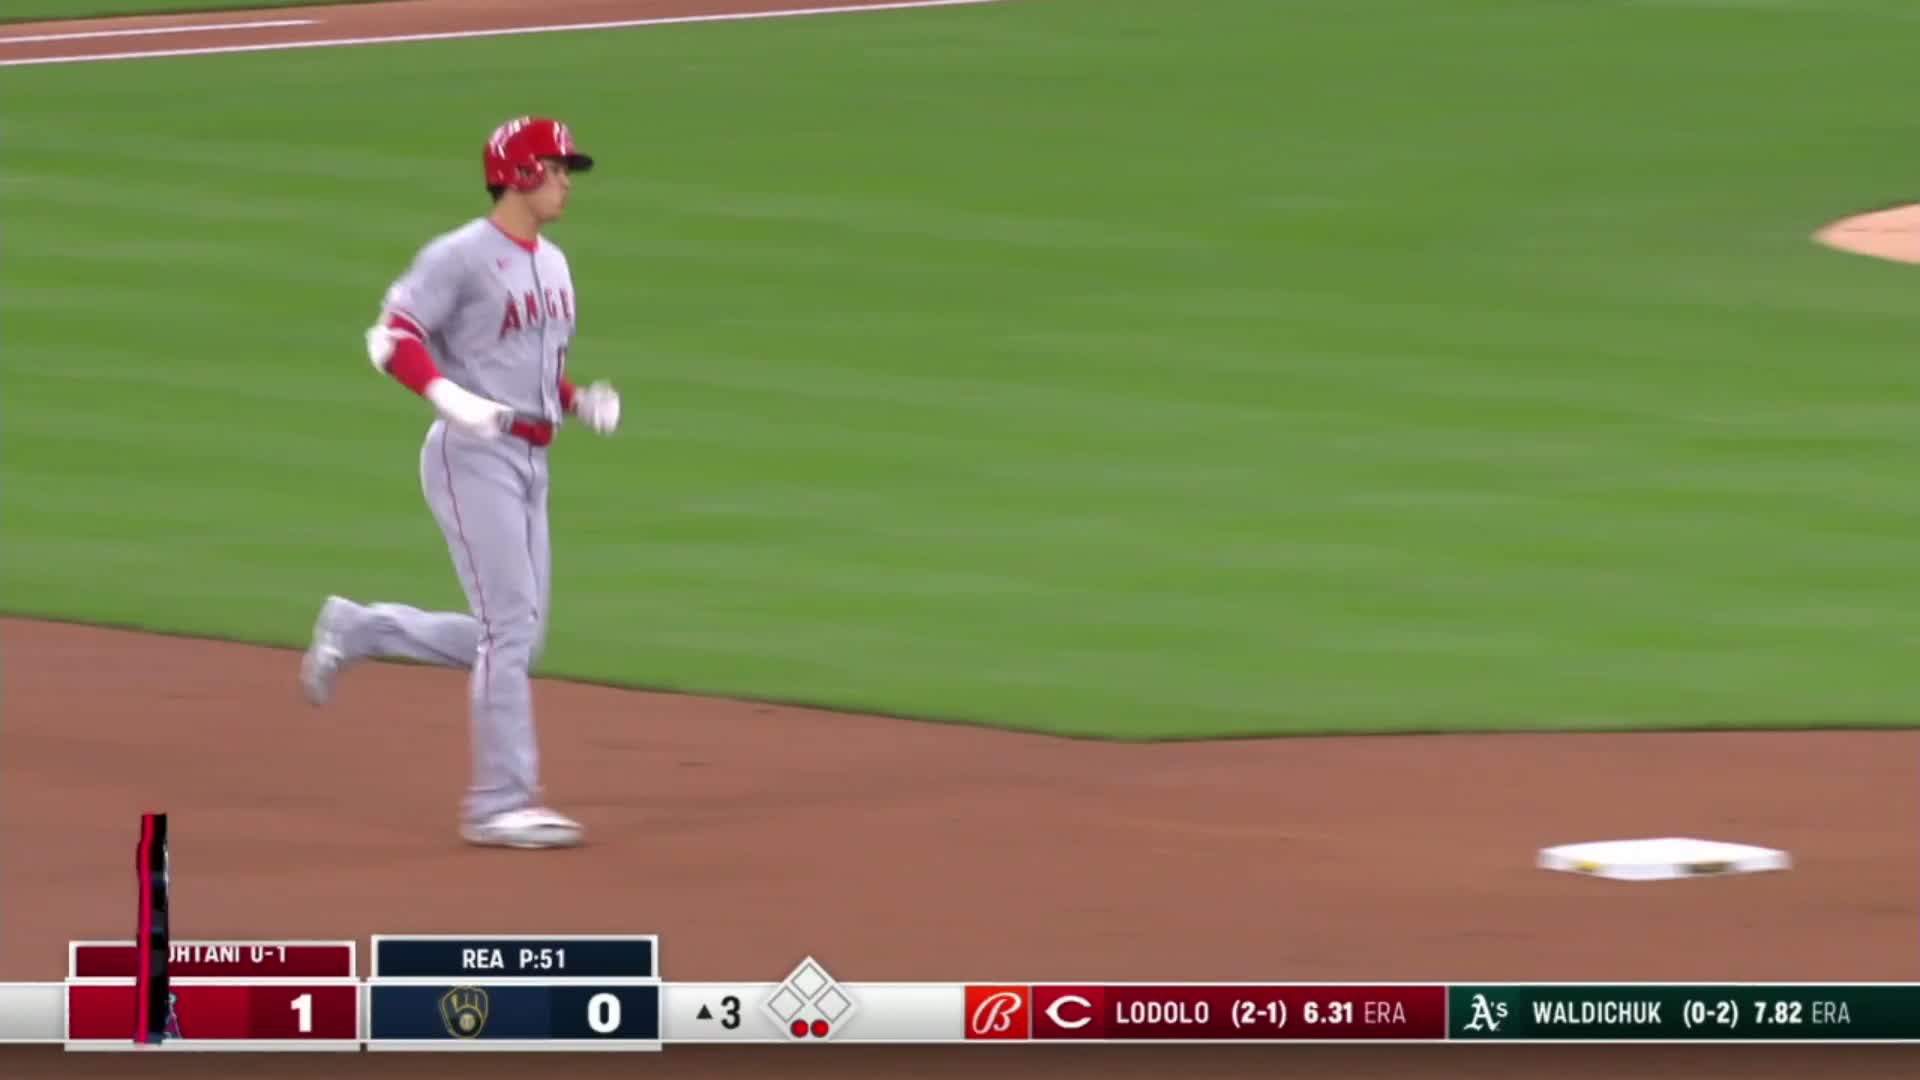 GIF: Zack Greinke throws 53 mph curve to Paul Maholm. Threw a 66